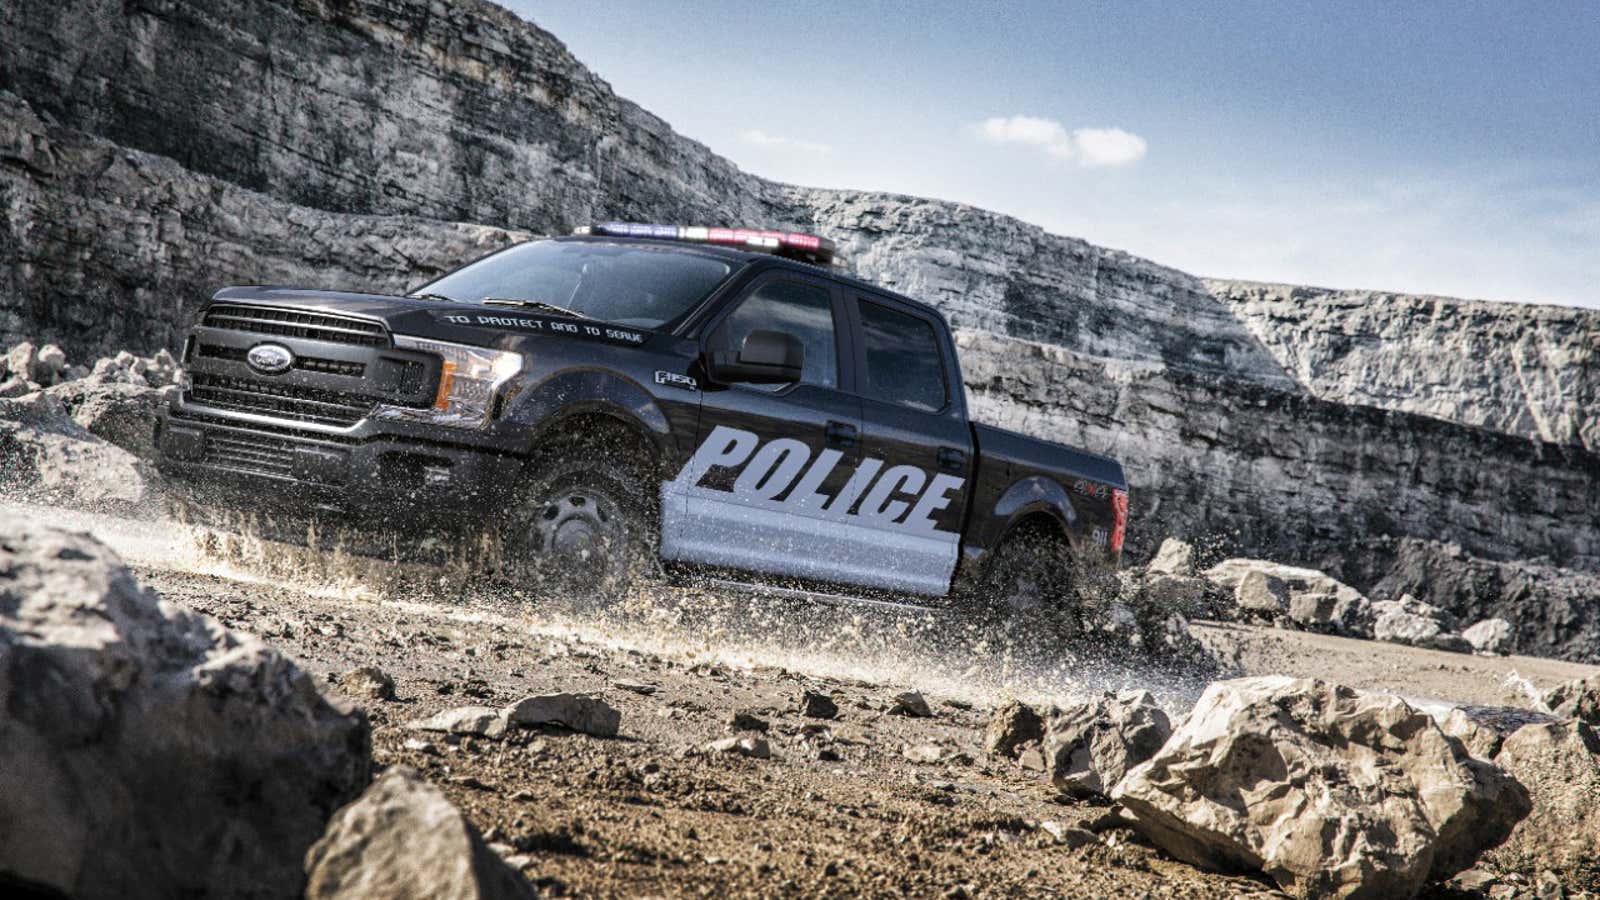 Ford’s latest F-150 truck, in a police uniform.